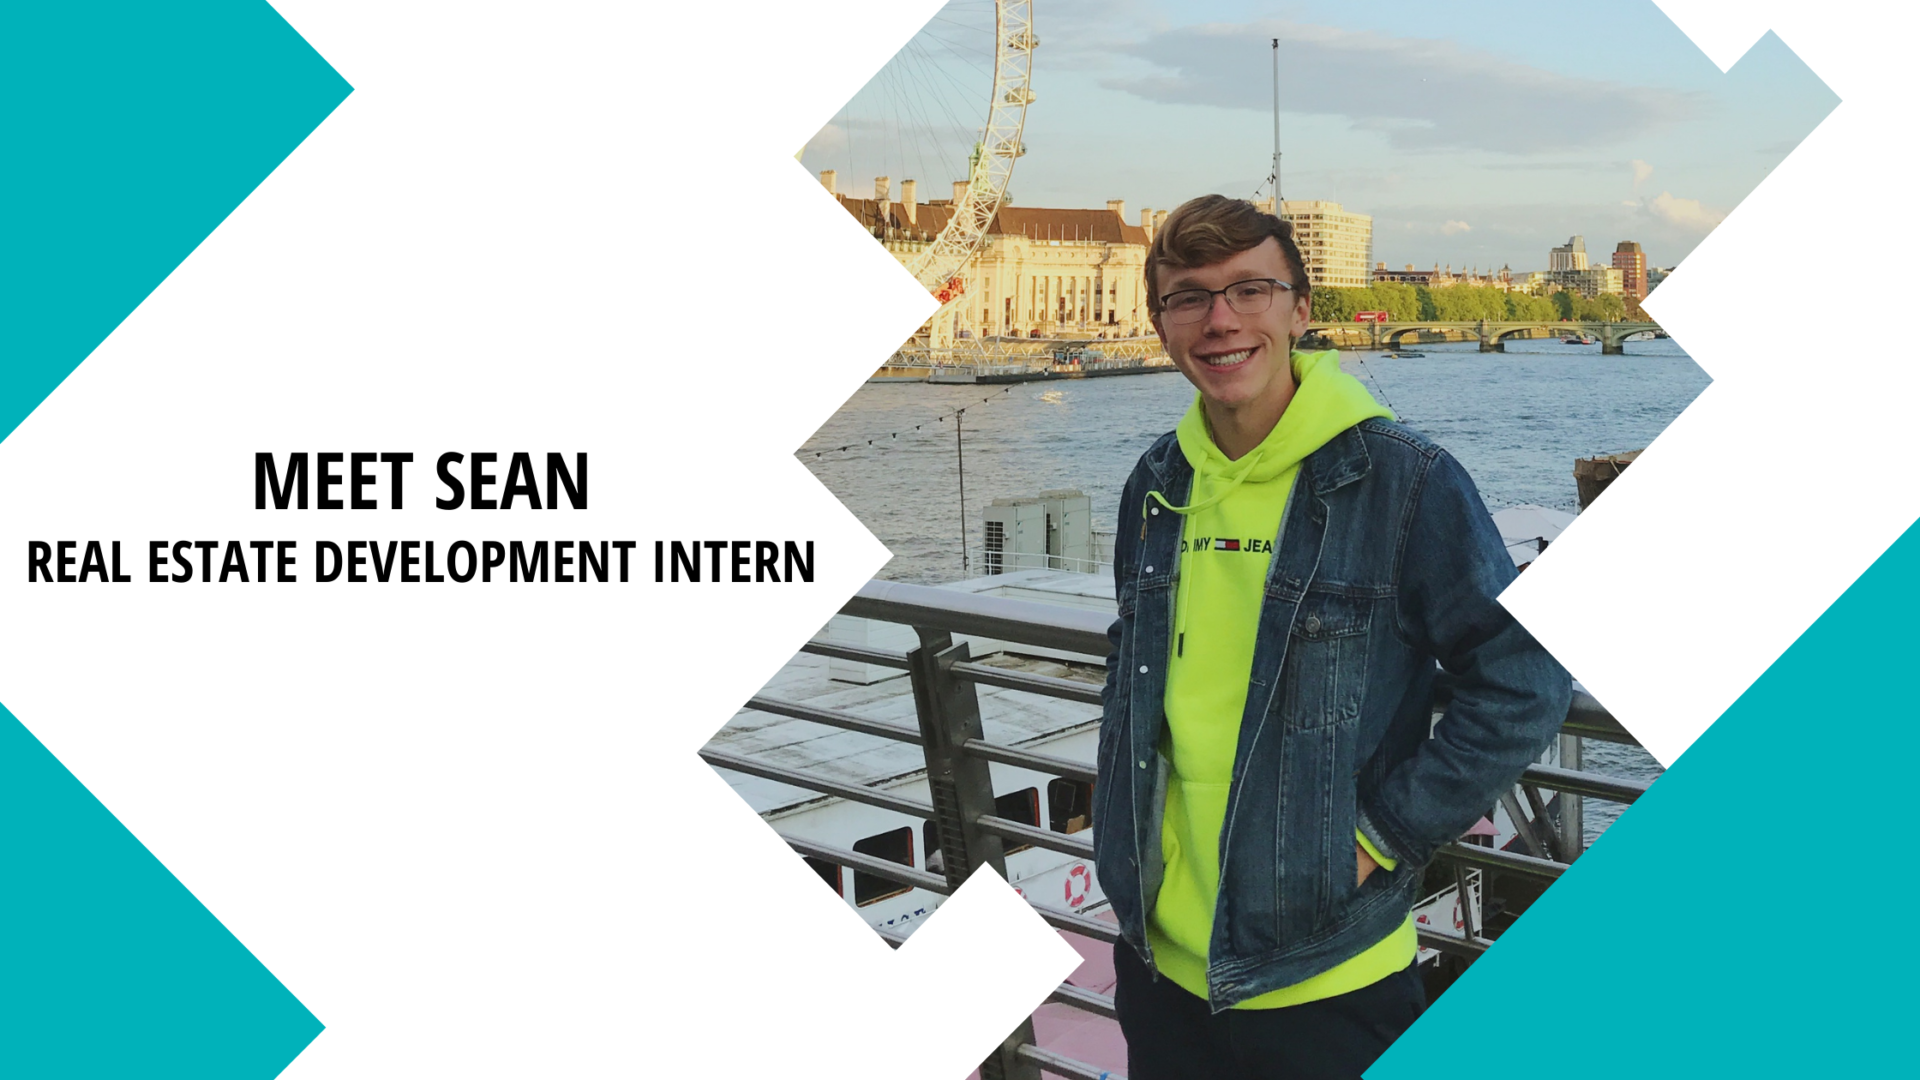 Meet Sean: Real Estate Development Intern. A picture of Sean in front of a body of water wearing a green hoodie and jacket.